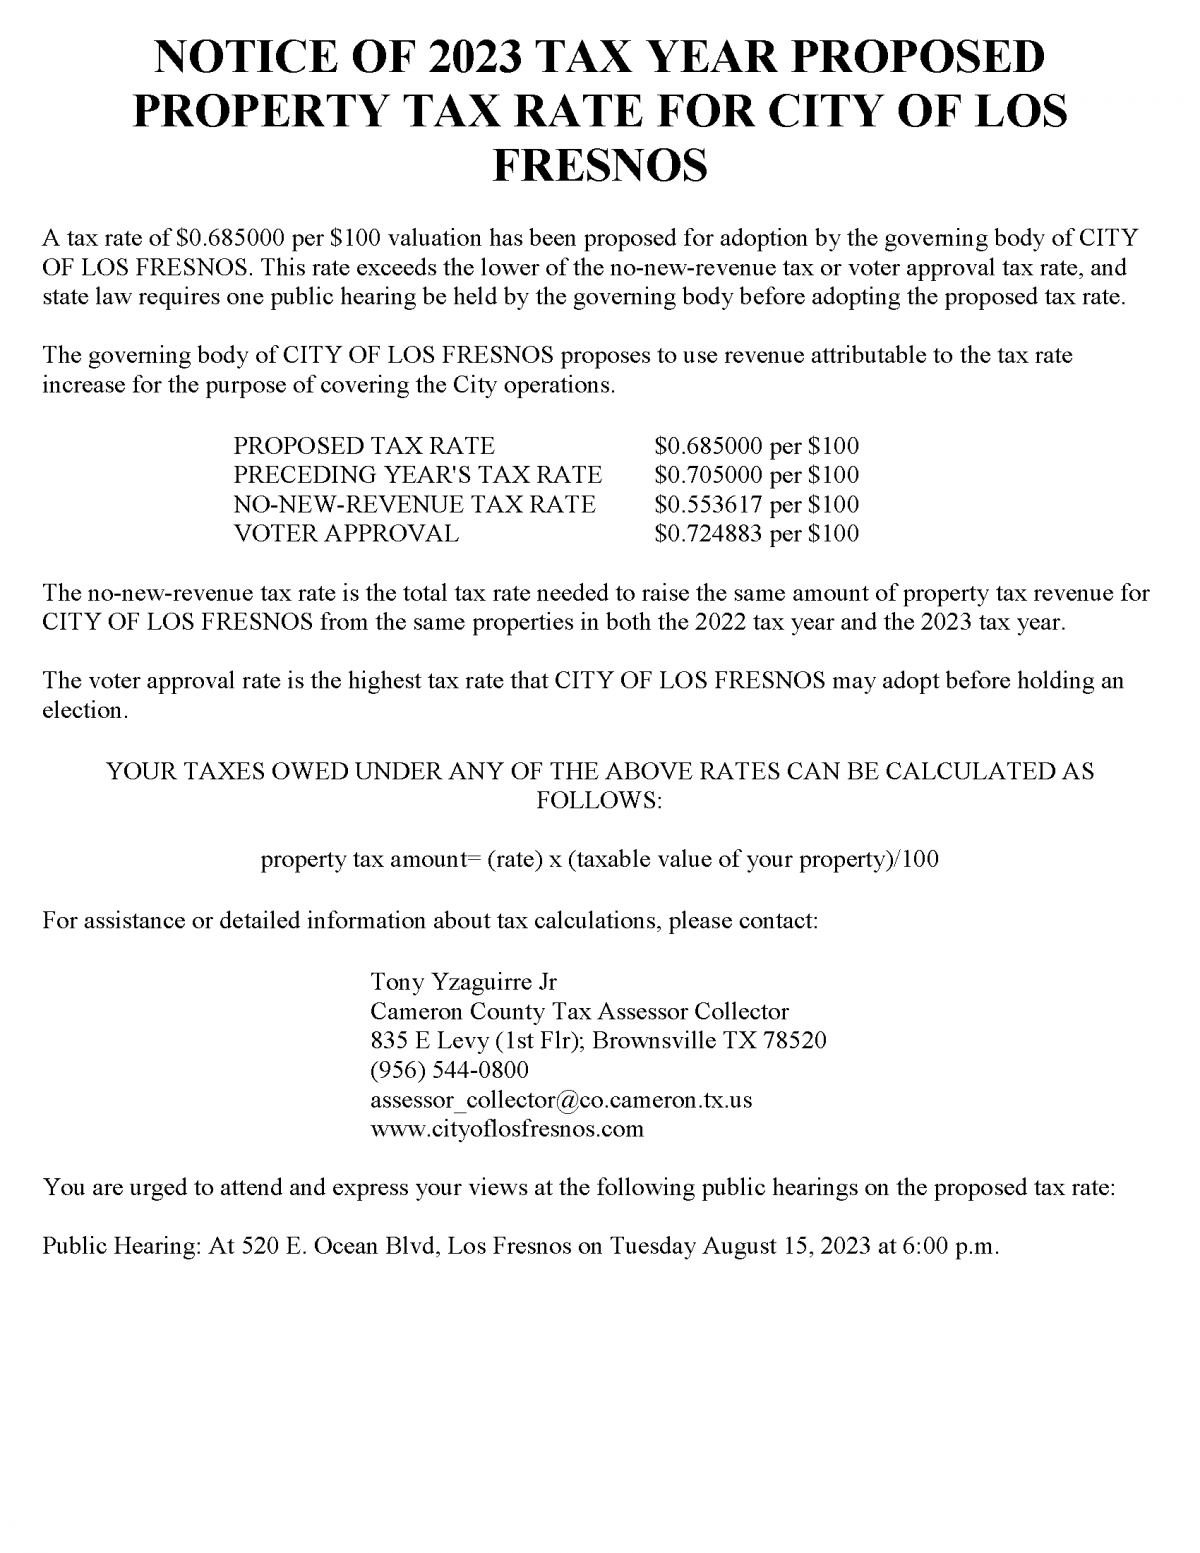 Notice of 2023 Tax Year Proposed Property Tax Rate for City of Los Fresnos